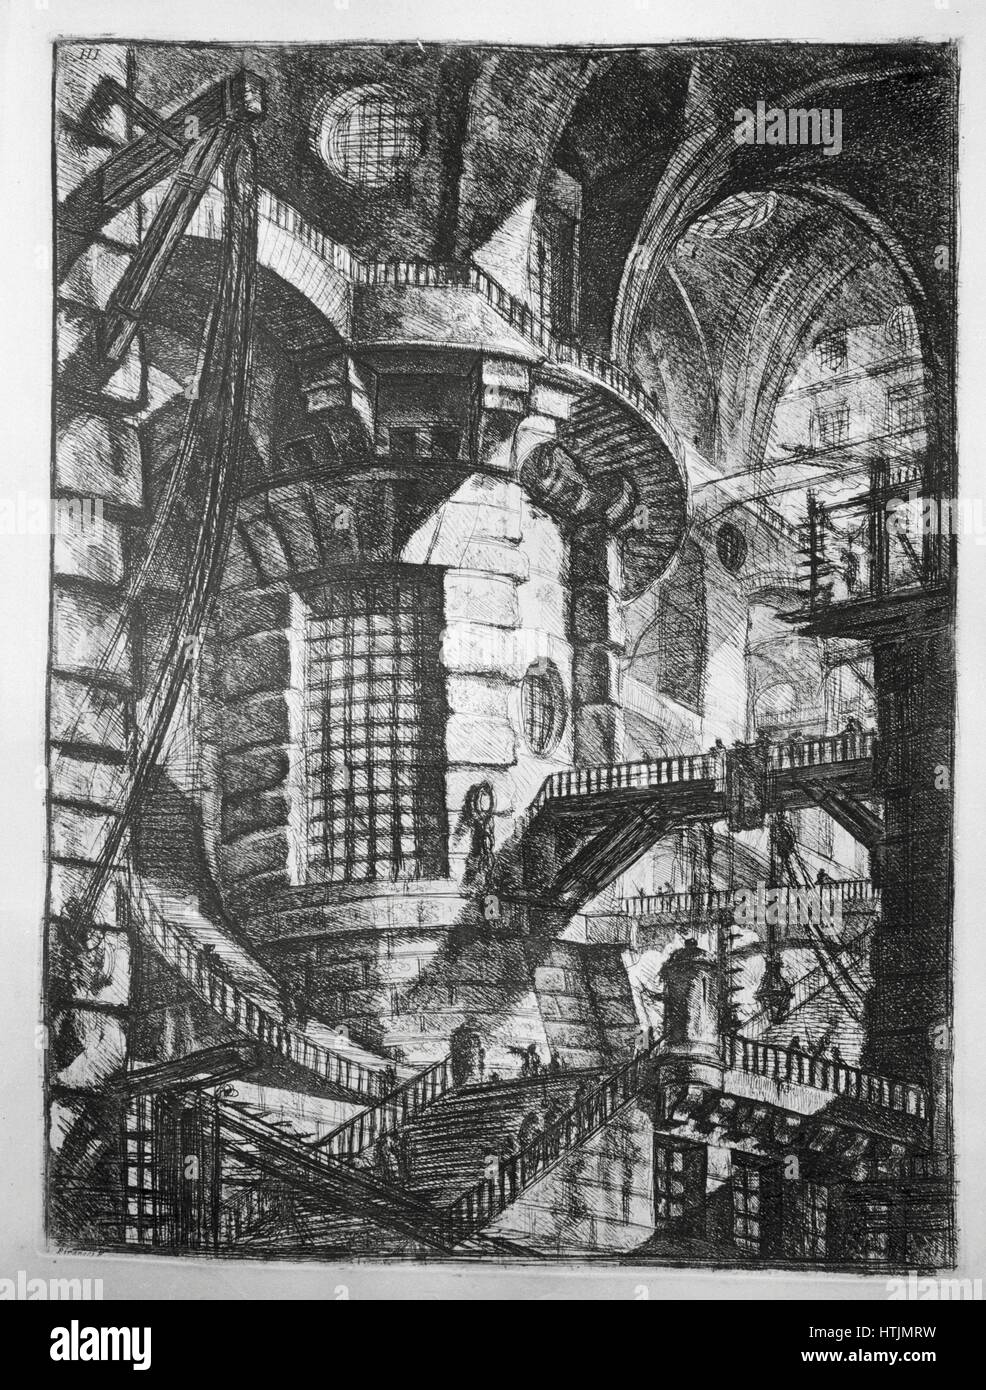 The Imaginary Prisons (Carceri d'invenzione), second version of the series of engravings by Giovanni Battista Piranesi, published in 1761. Plate III: The Round Tower Private collection Stock Photo